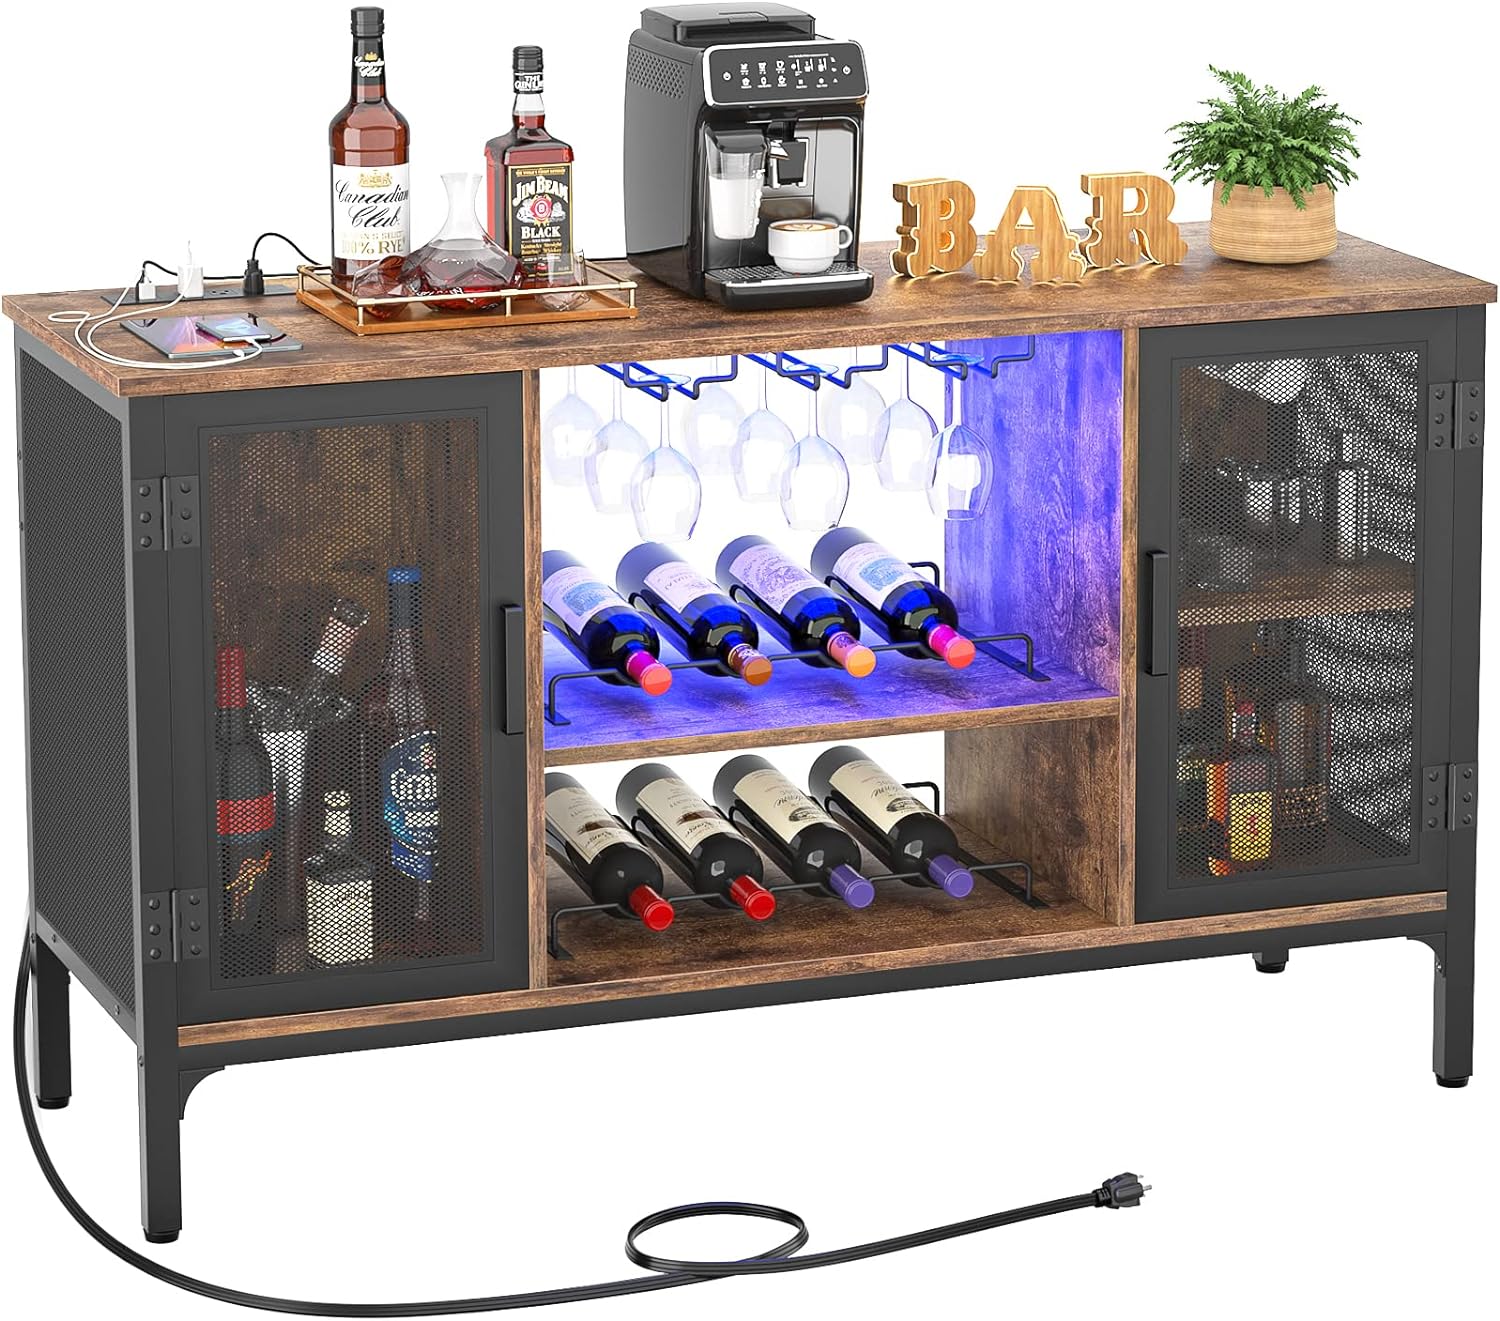 Homieasy Wine Bar Cabinet with Led Lights and Power Outlets, Industrial Coffee Bar Cabinet for Liquor and Glasses, Farmhouse Bar Cabinet with Removable Wine Racks, Rustic Brown